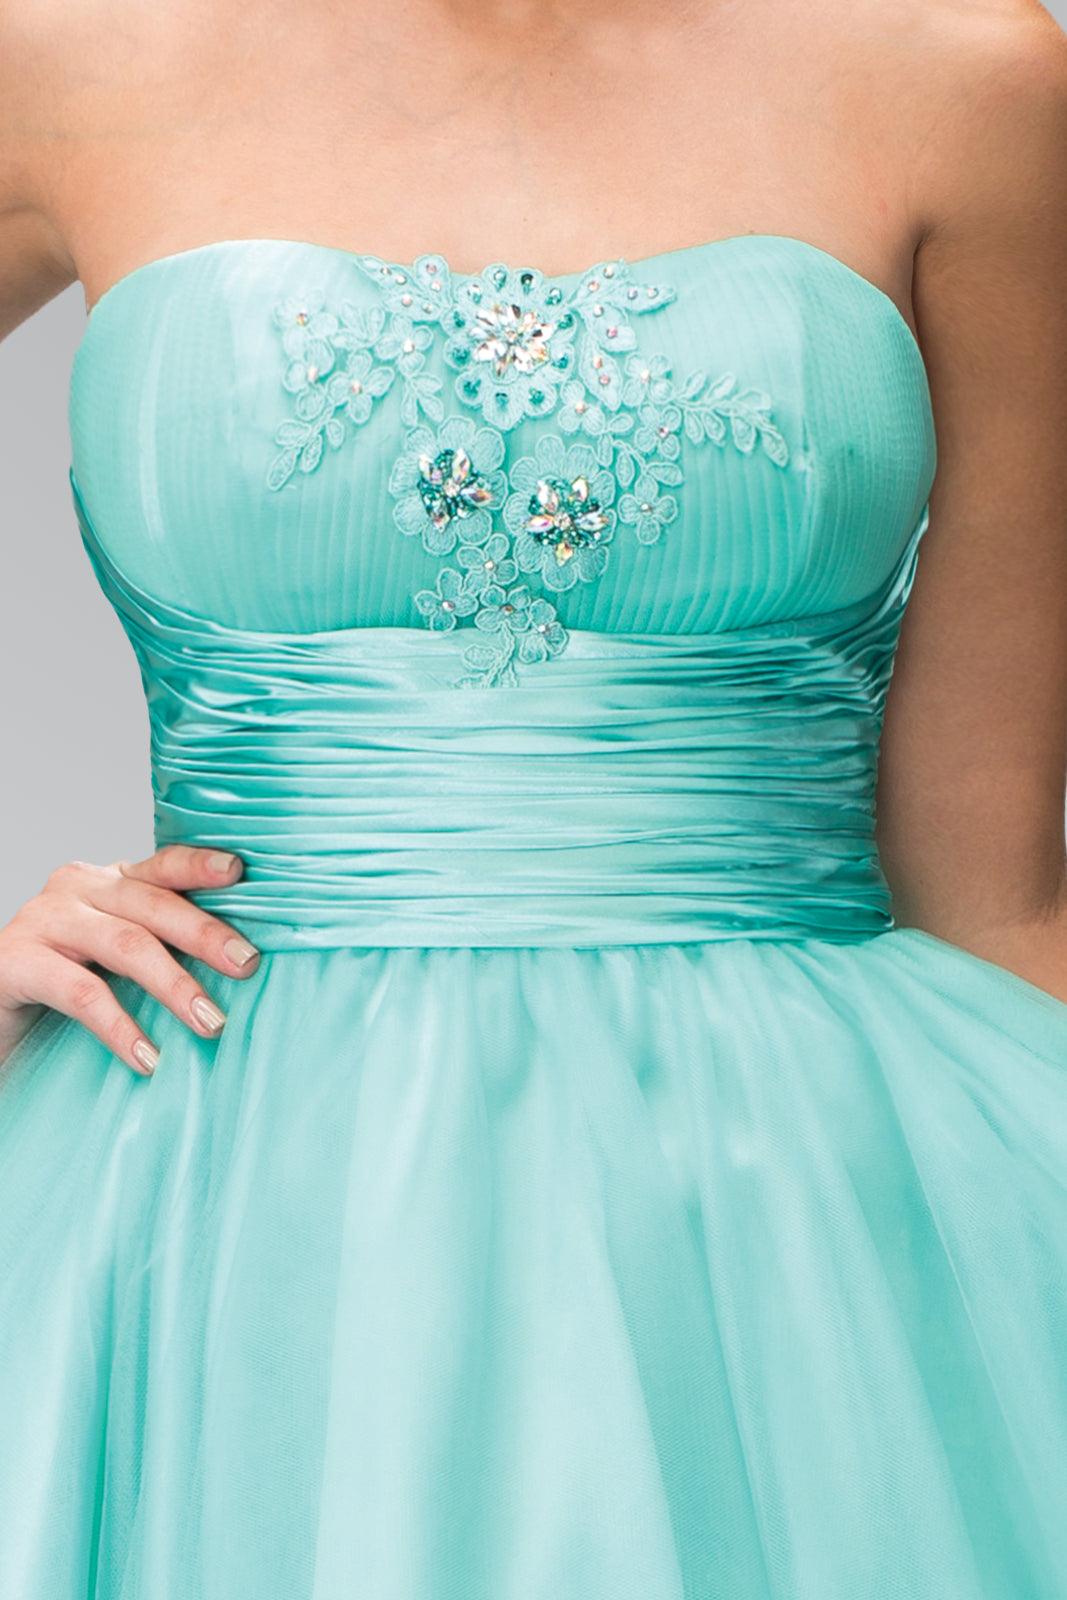 Strapless Short Tulle Prom Dress - The Dress Outlet